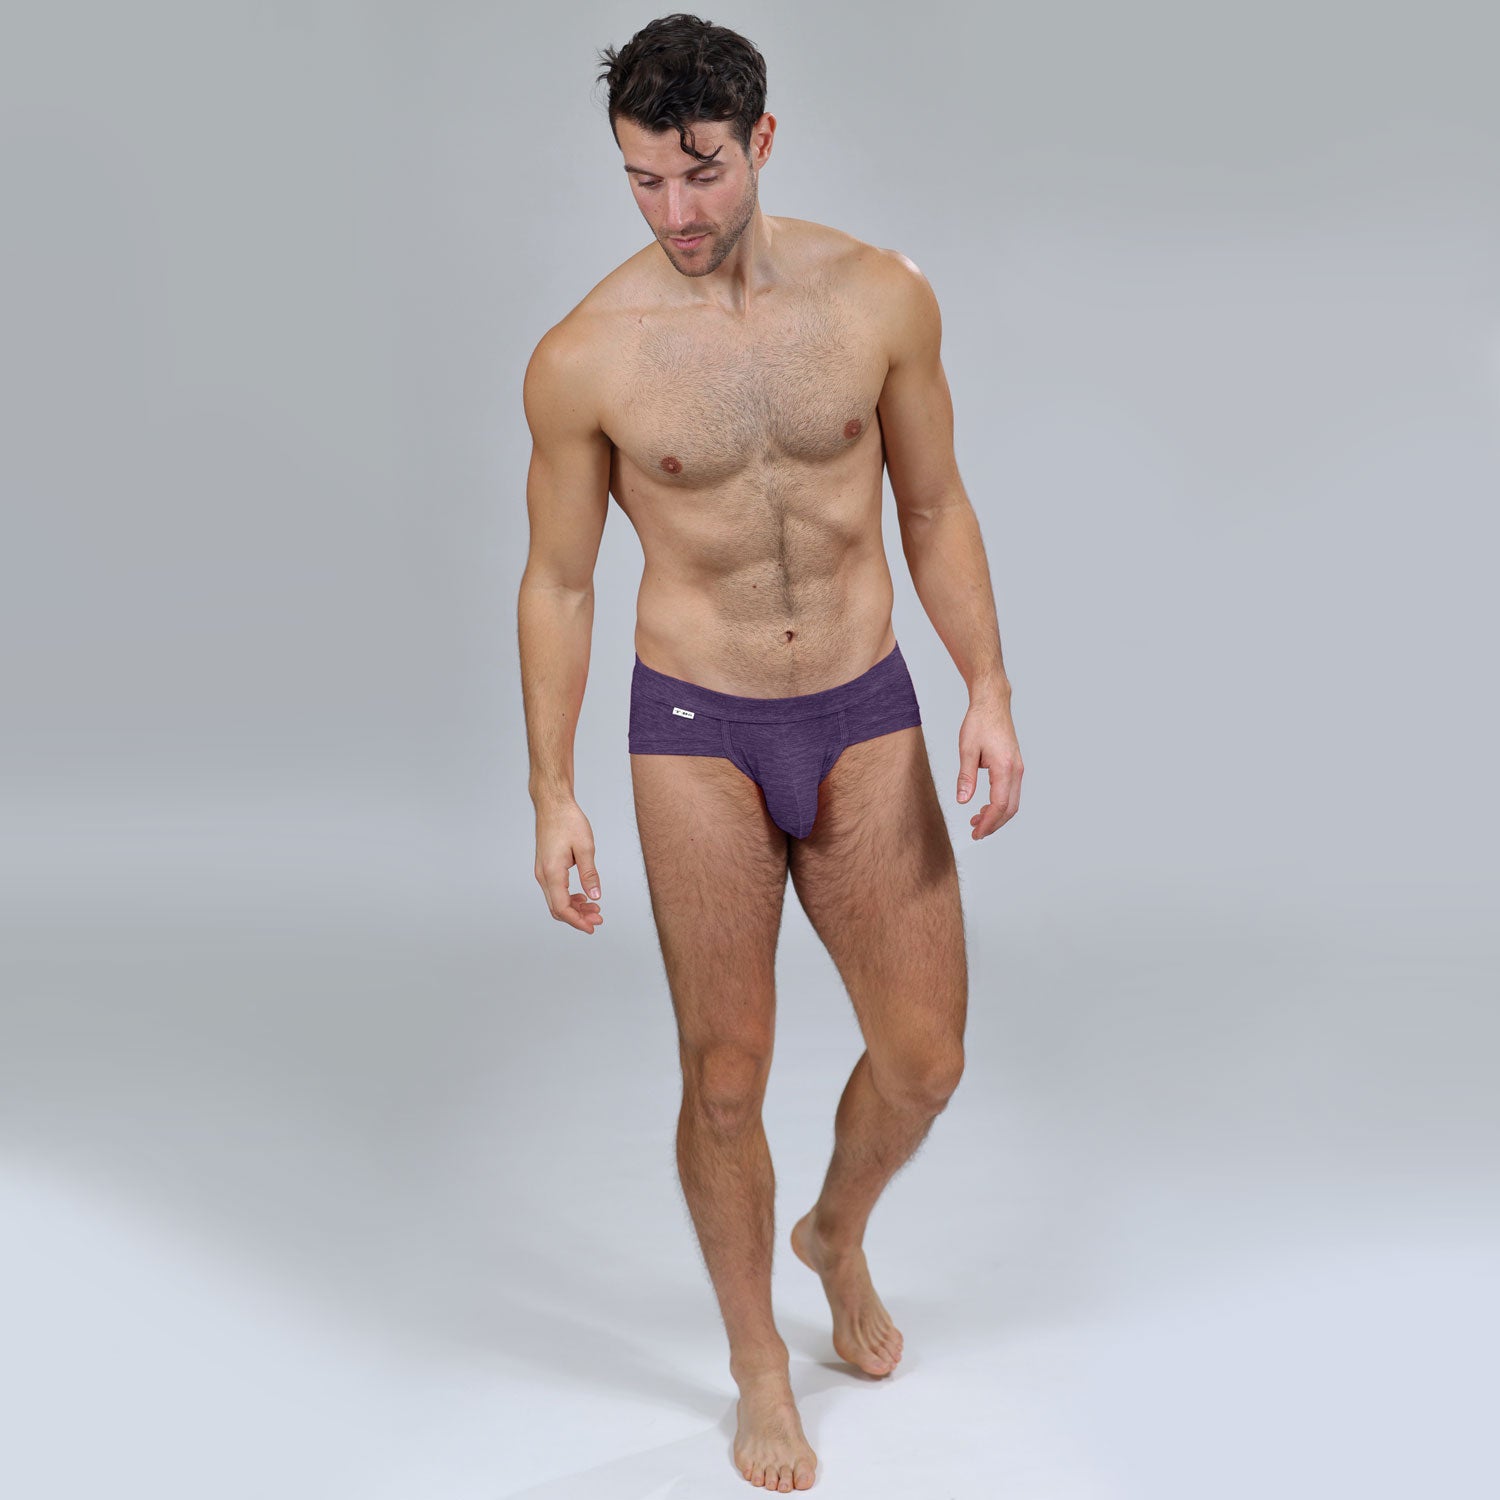 The Limited Edition Acai Purple Brief for men in the USA and Canada